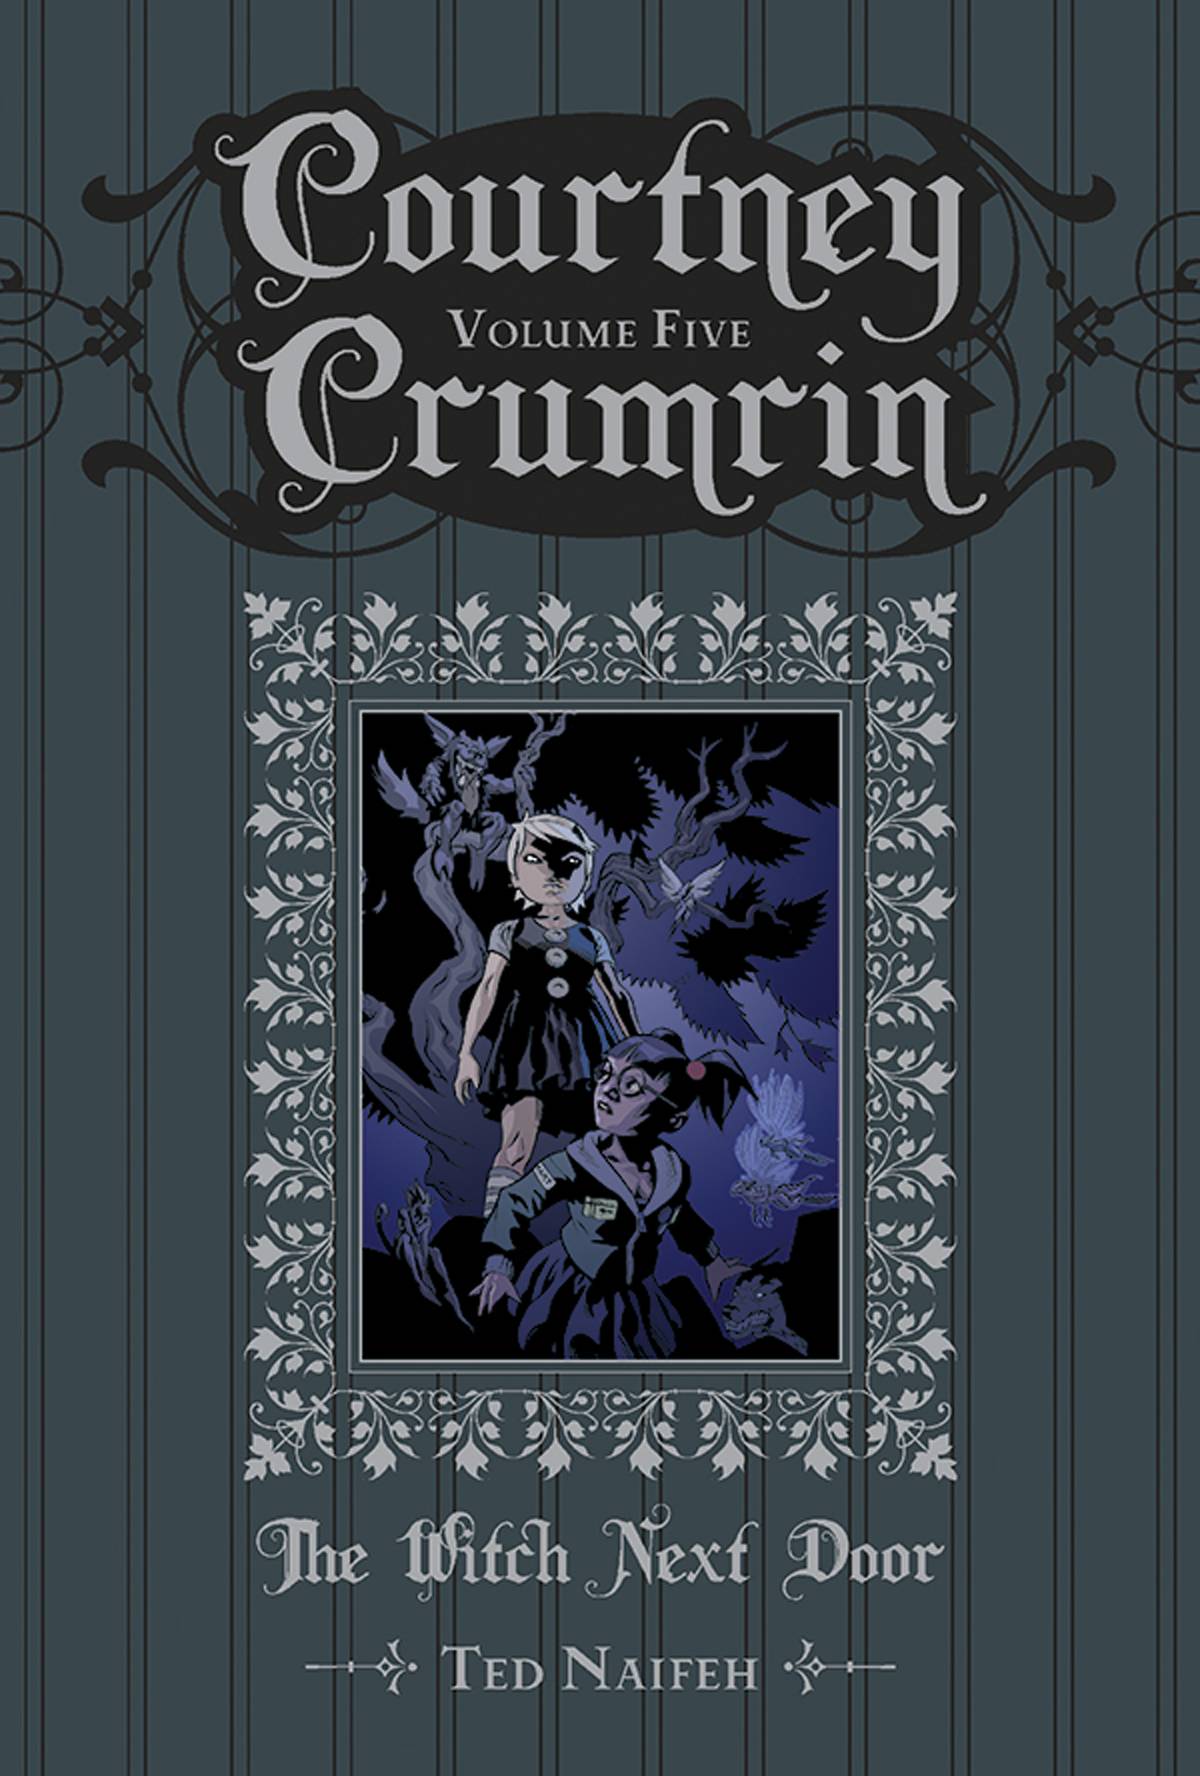 Courtney Crumrin Special Edition Hardcover Volume 5